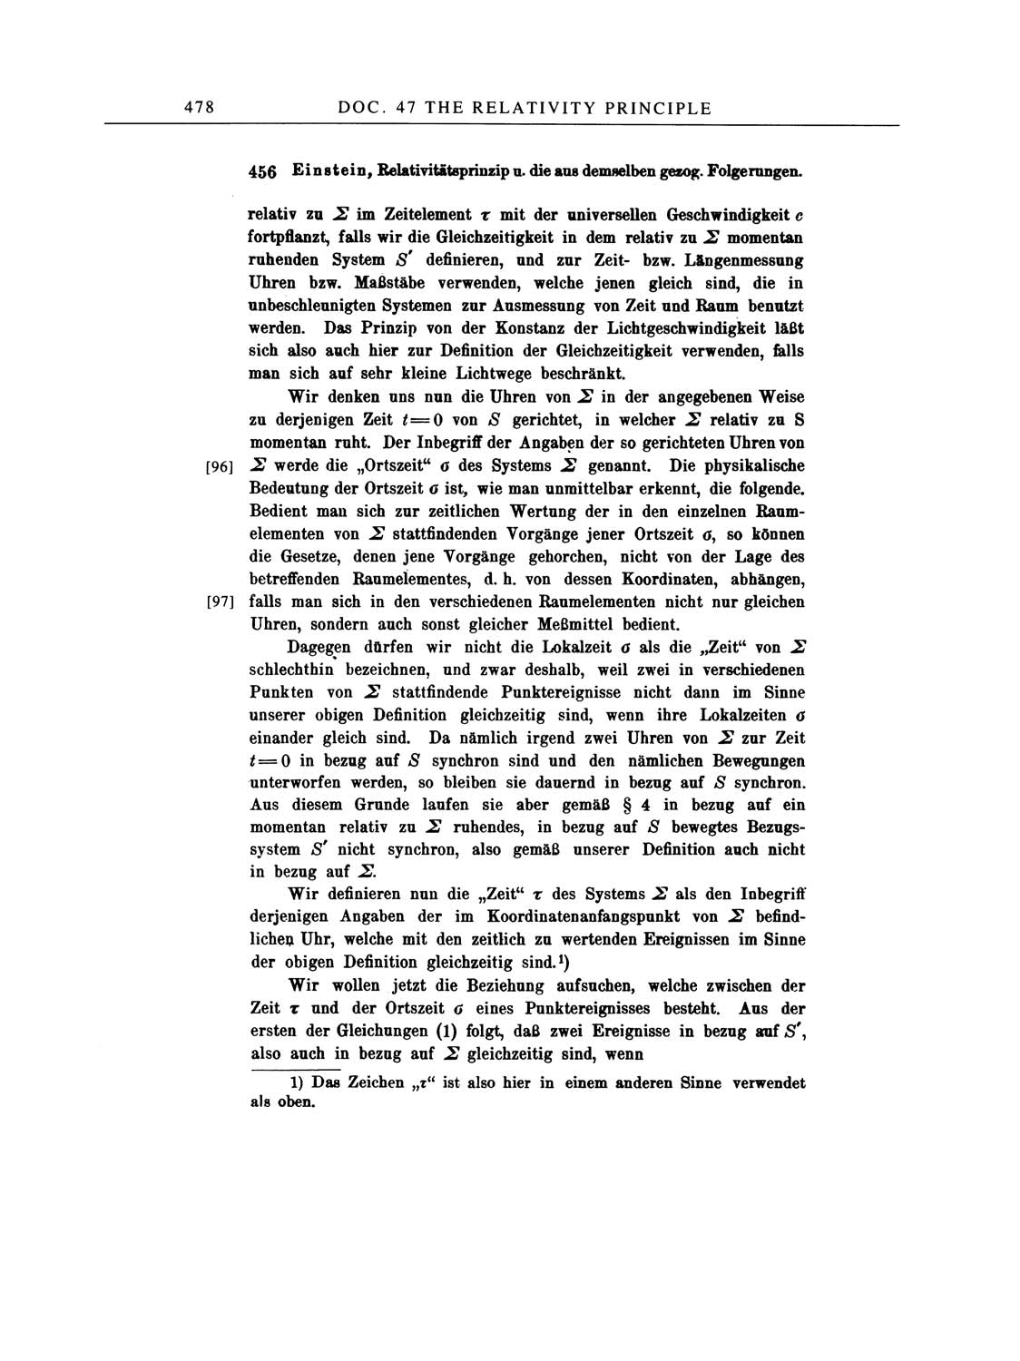 Volume 2: The Swiss Years: Writings, 1900-1909 page 478